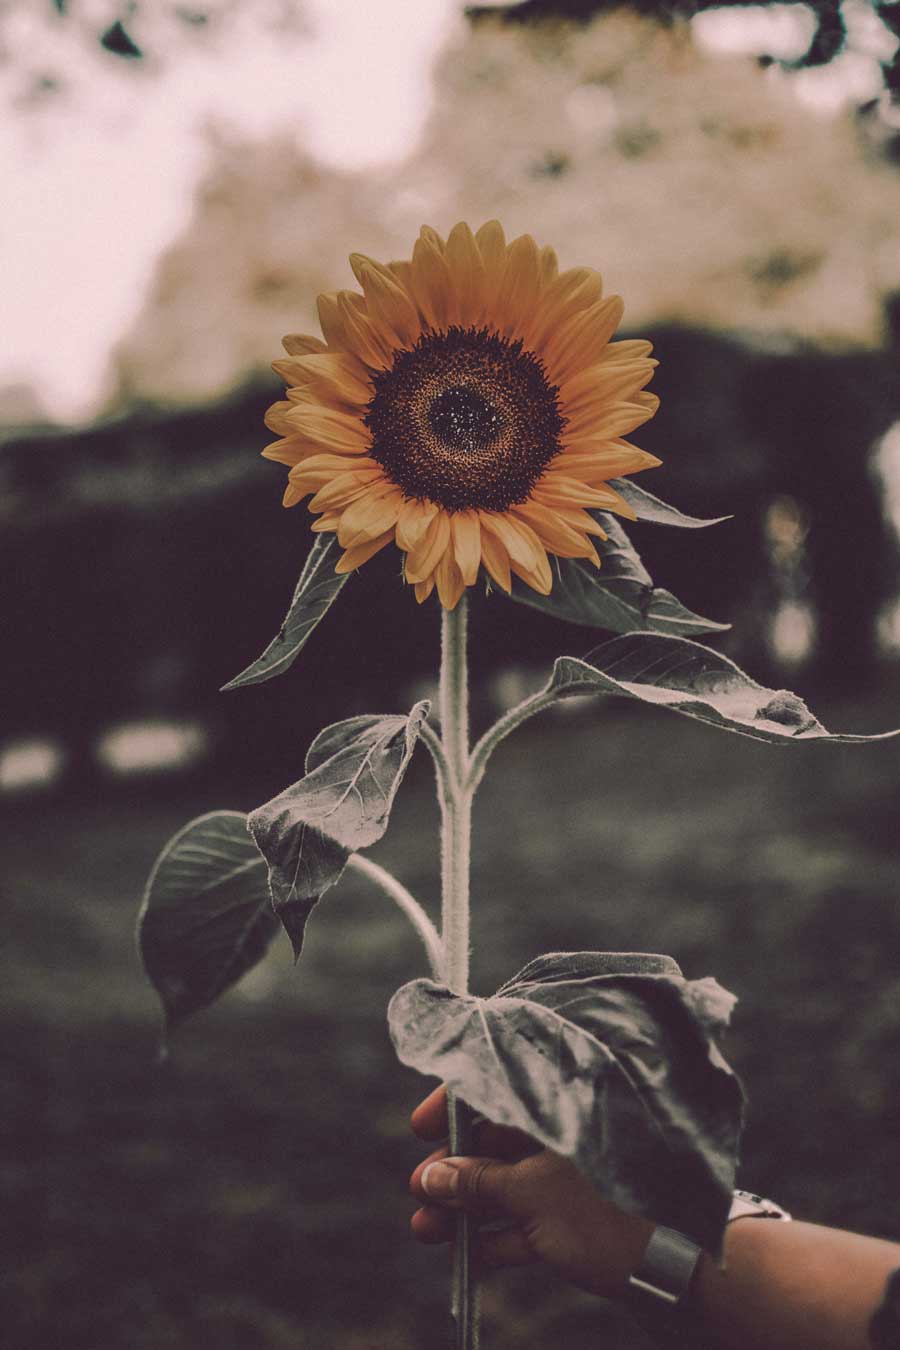 A hand holding a sunflower with a blurry background. - Sunflower, photography